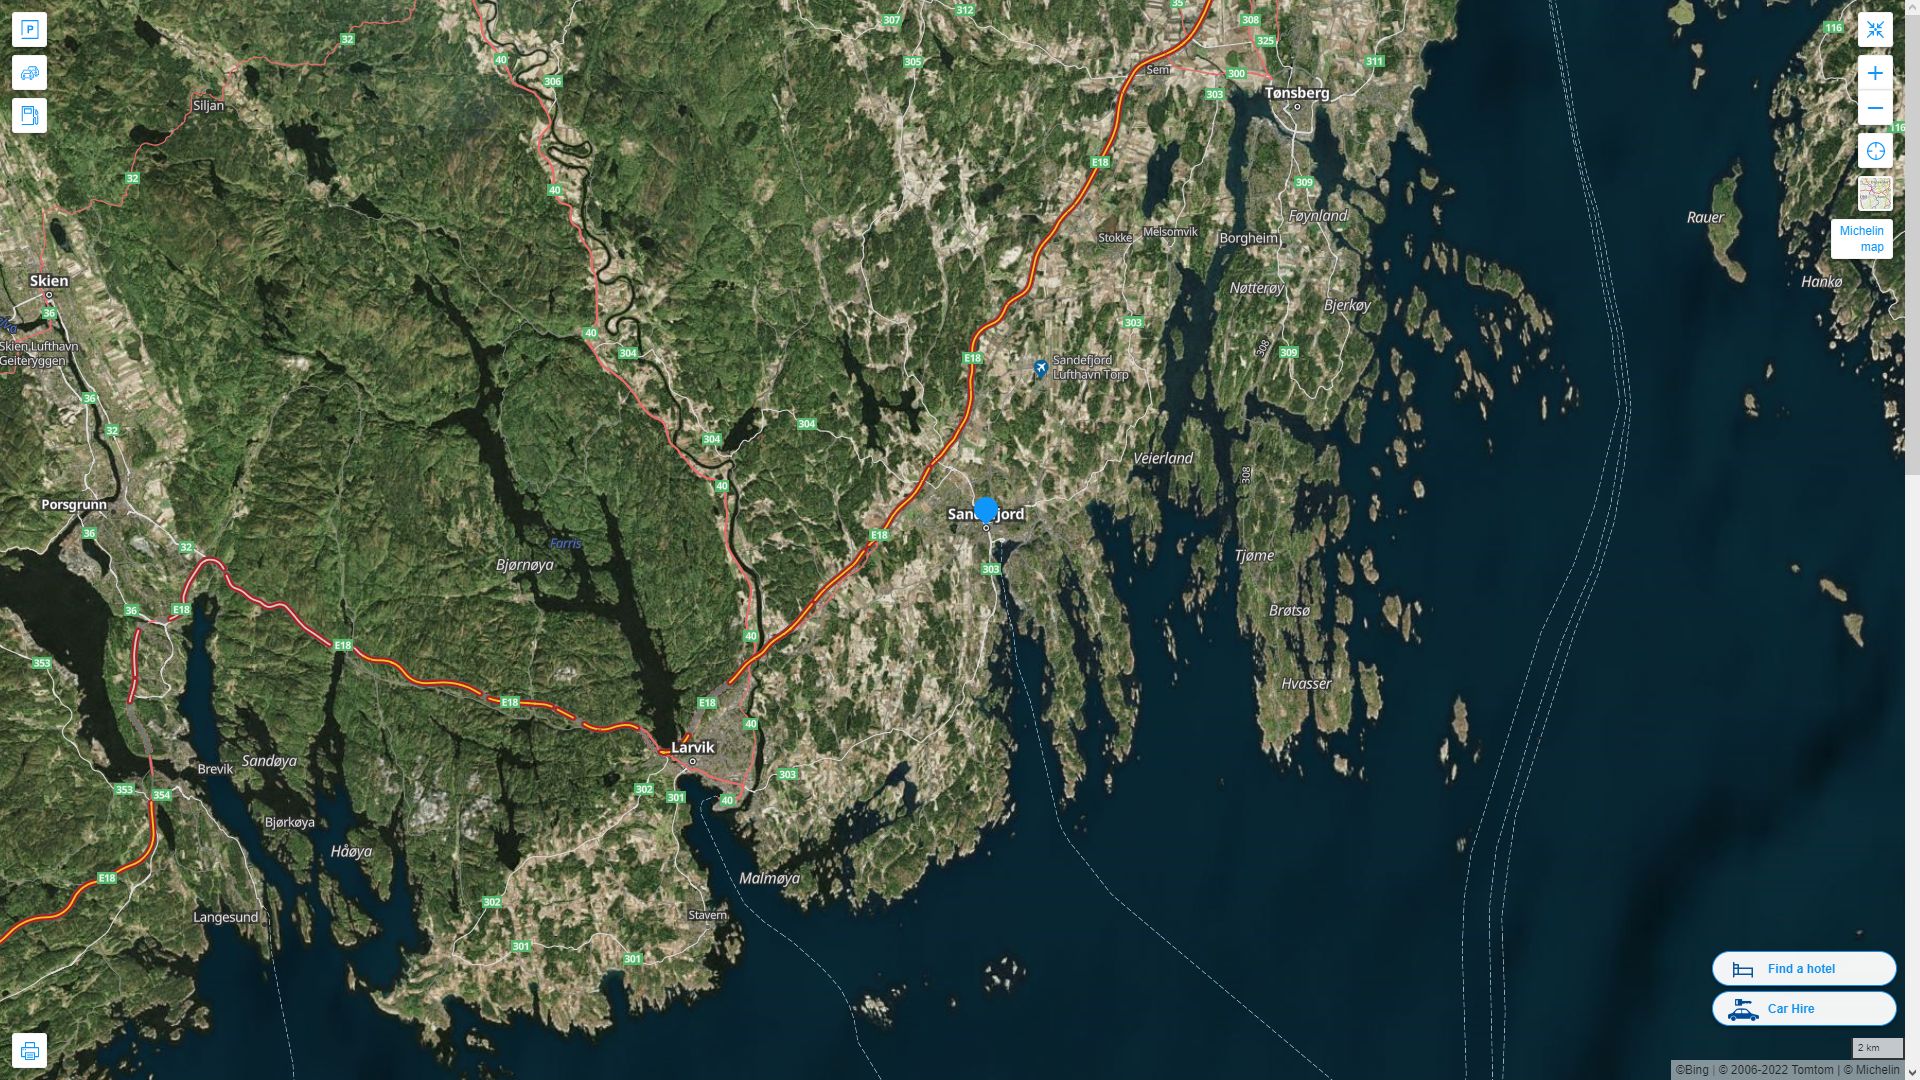 Sandefjord Highway and Road Map with Satellite View